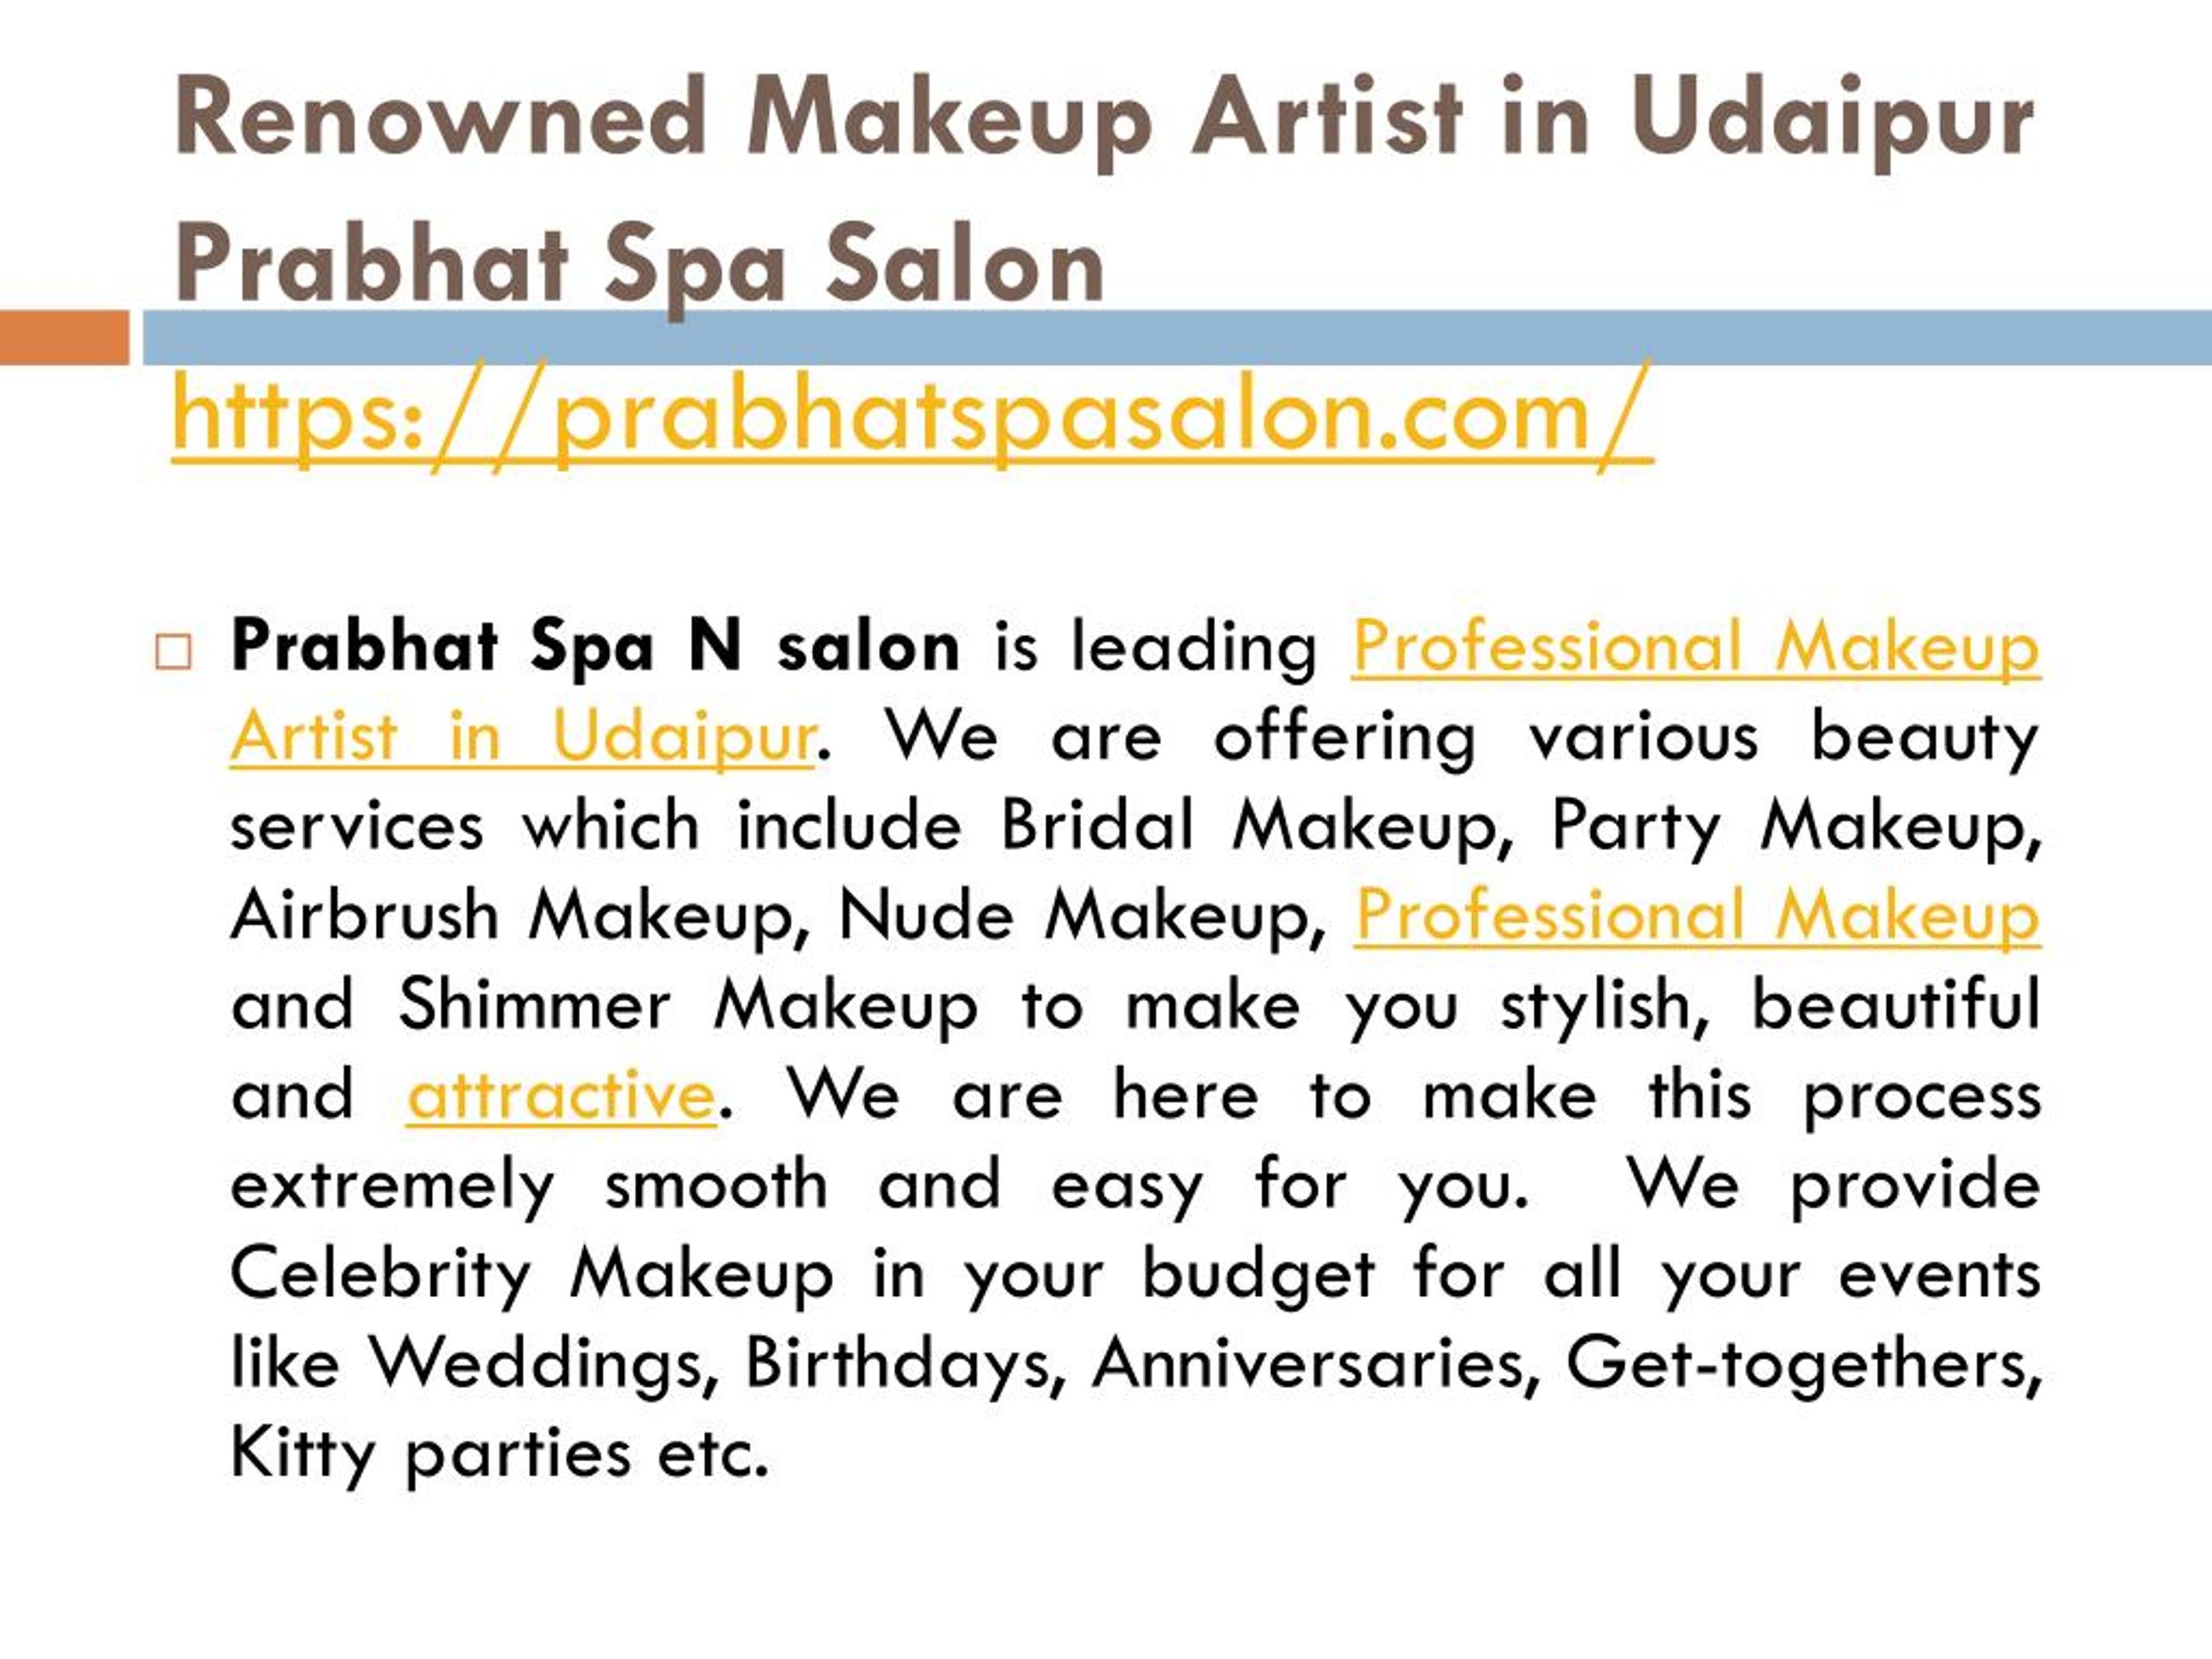 PPT - Renowned Makeup Artist in Udaipur Prabhat Spa Salon PowerPoint  Presentation - ID:7845757